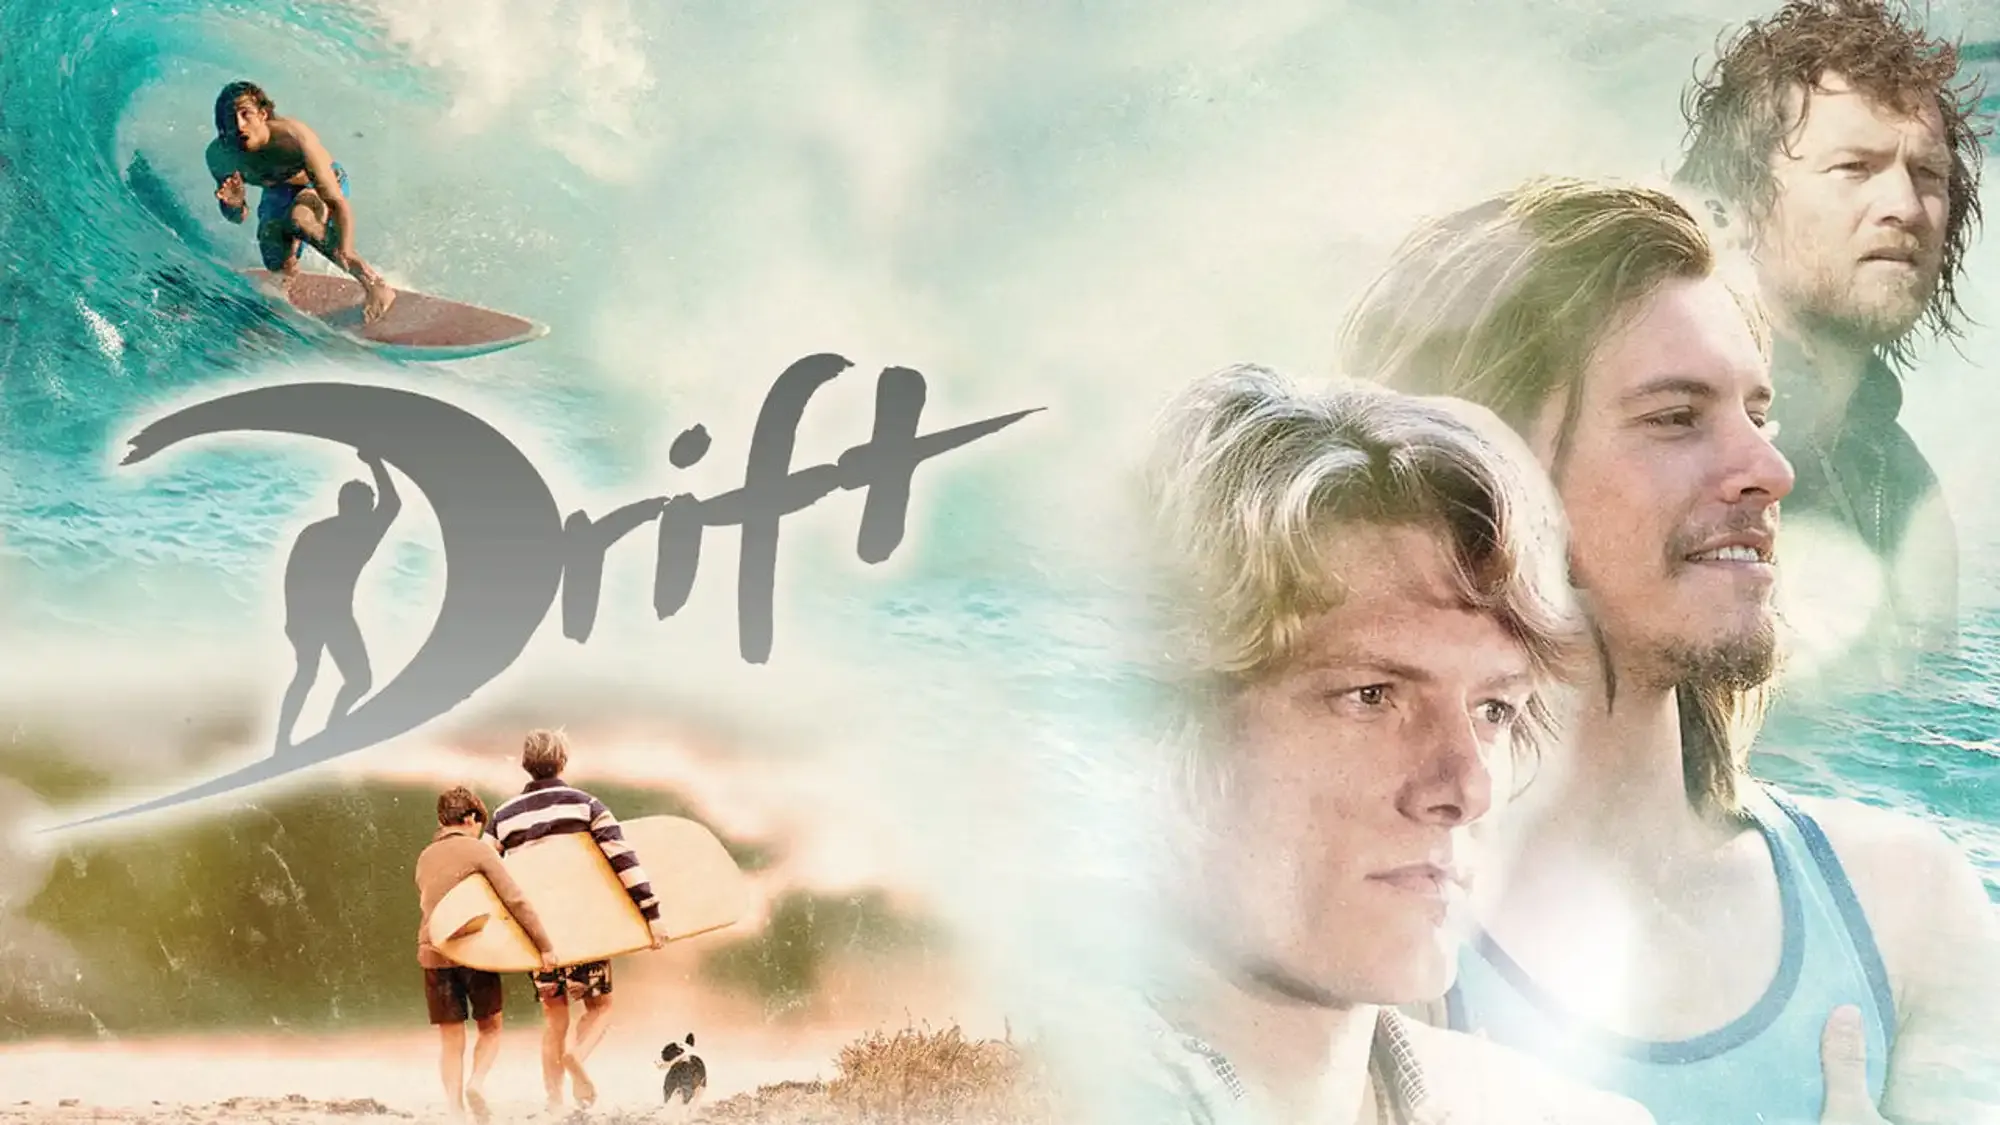 Drift movie review